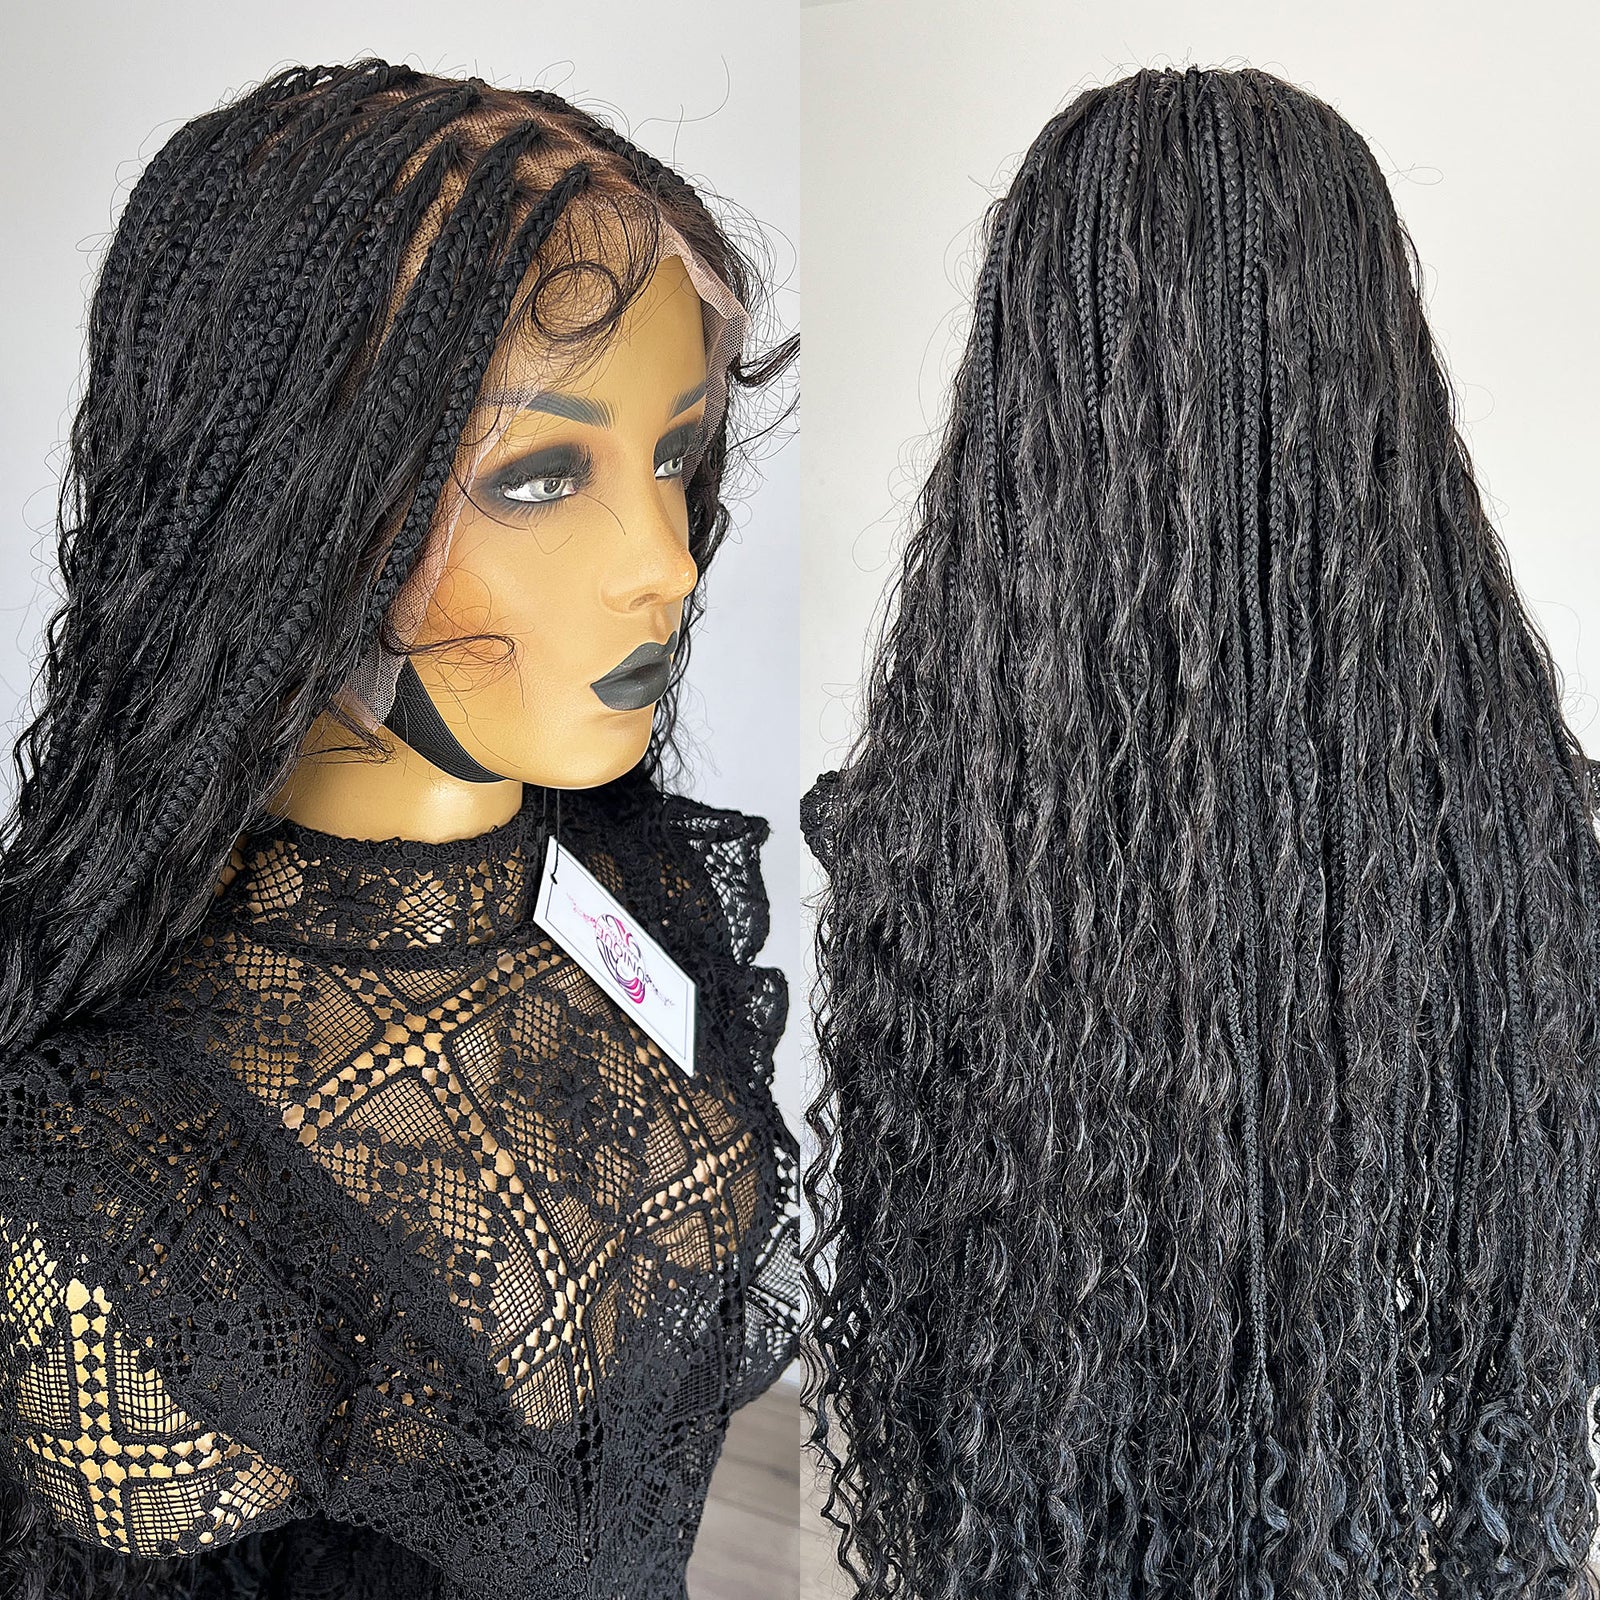 Received this Burgundy Knotless Box Braid Wig w/ Boho Curls from